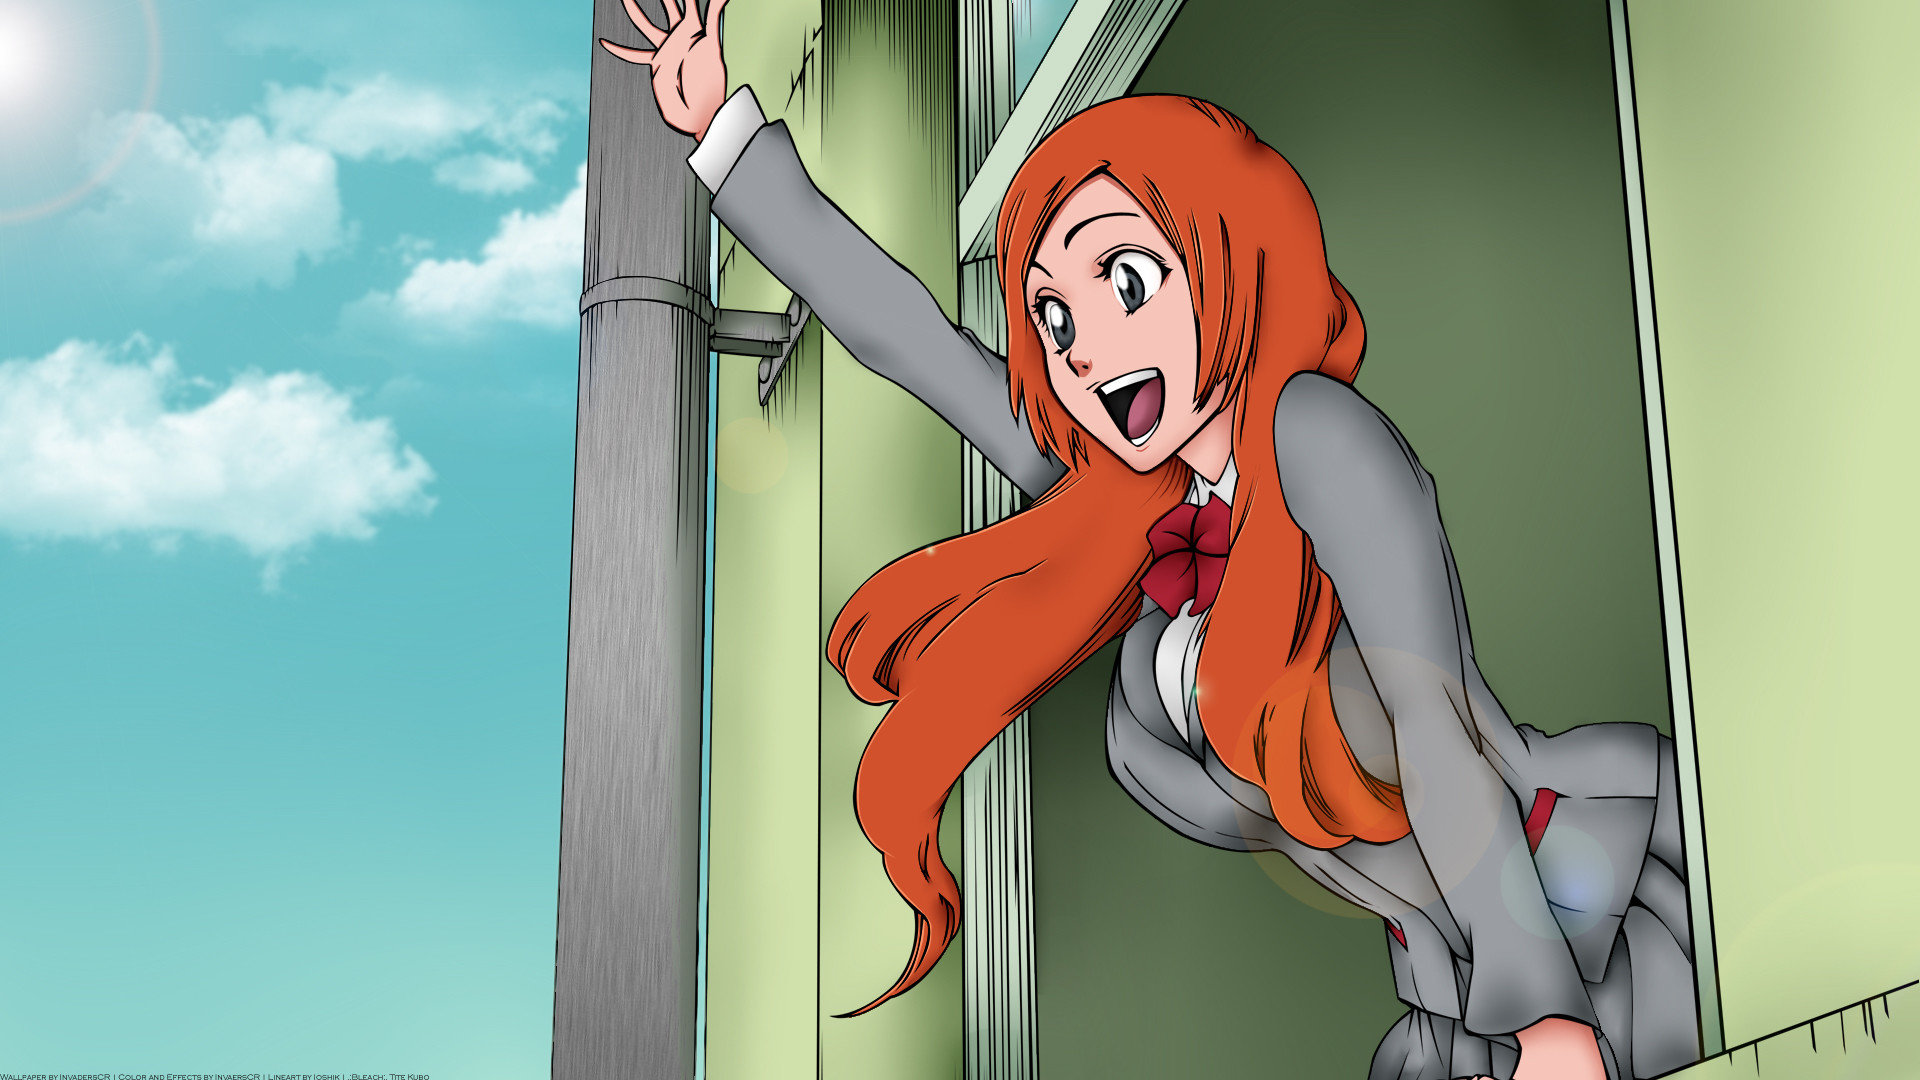 Download full hd 1920x1080 Orihime Inoue PC background ID:418647 for free